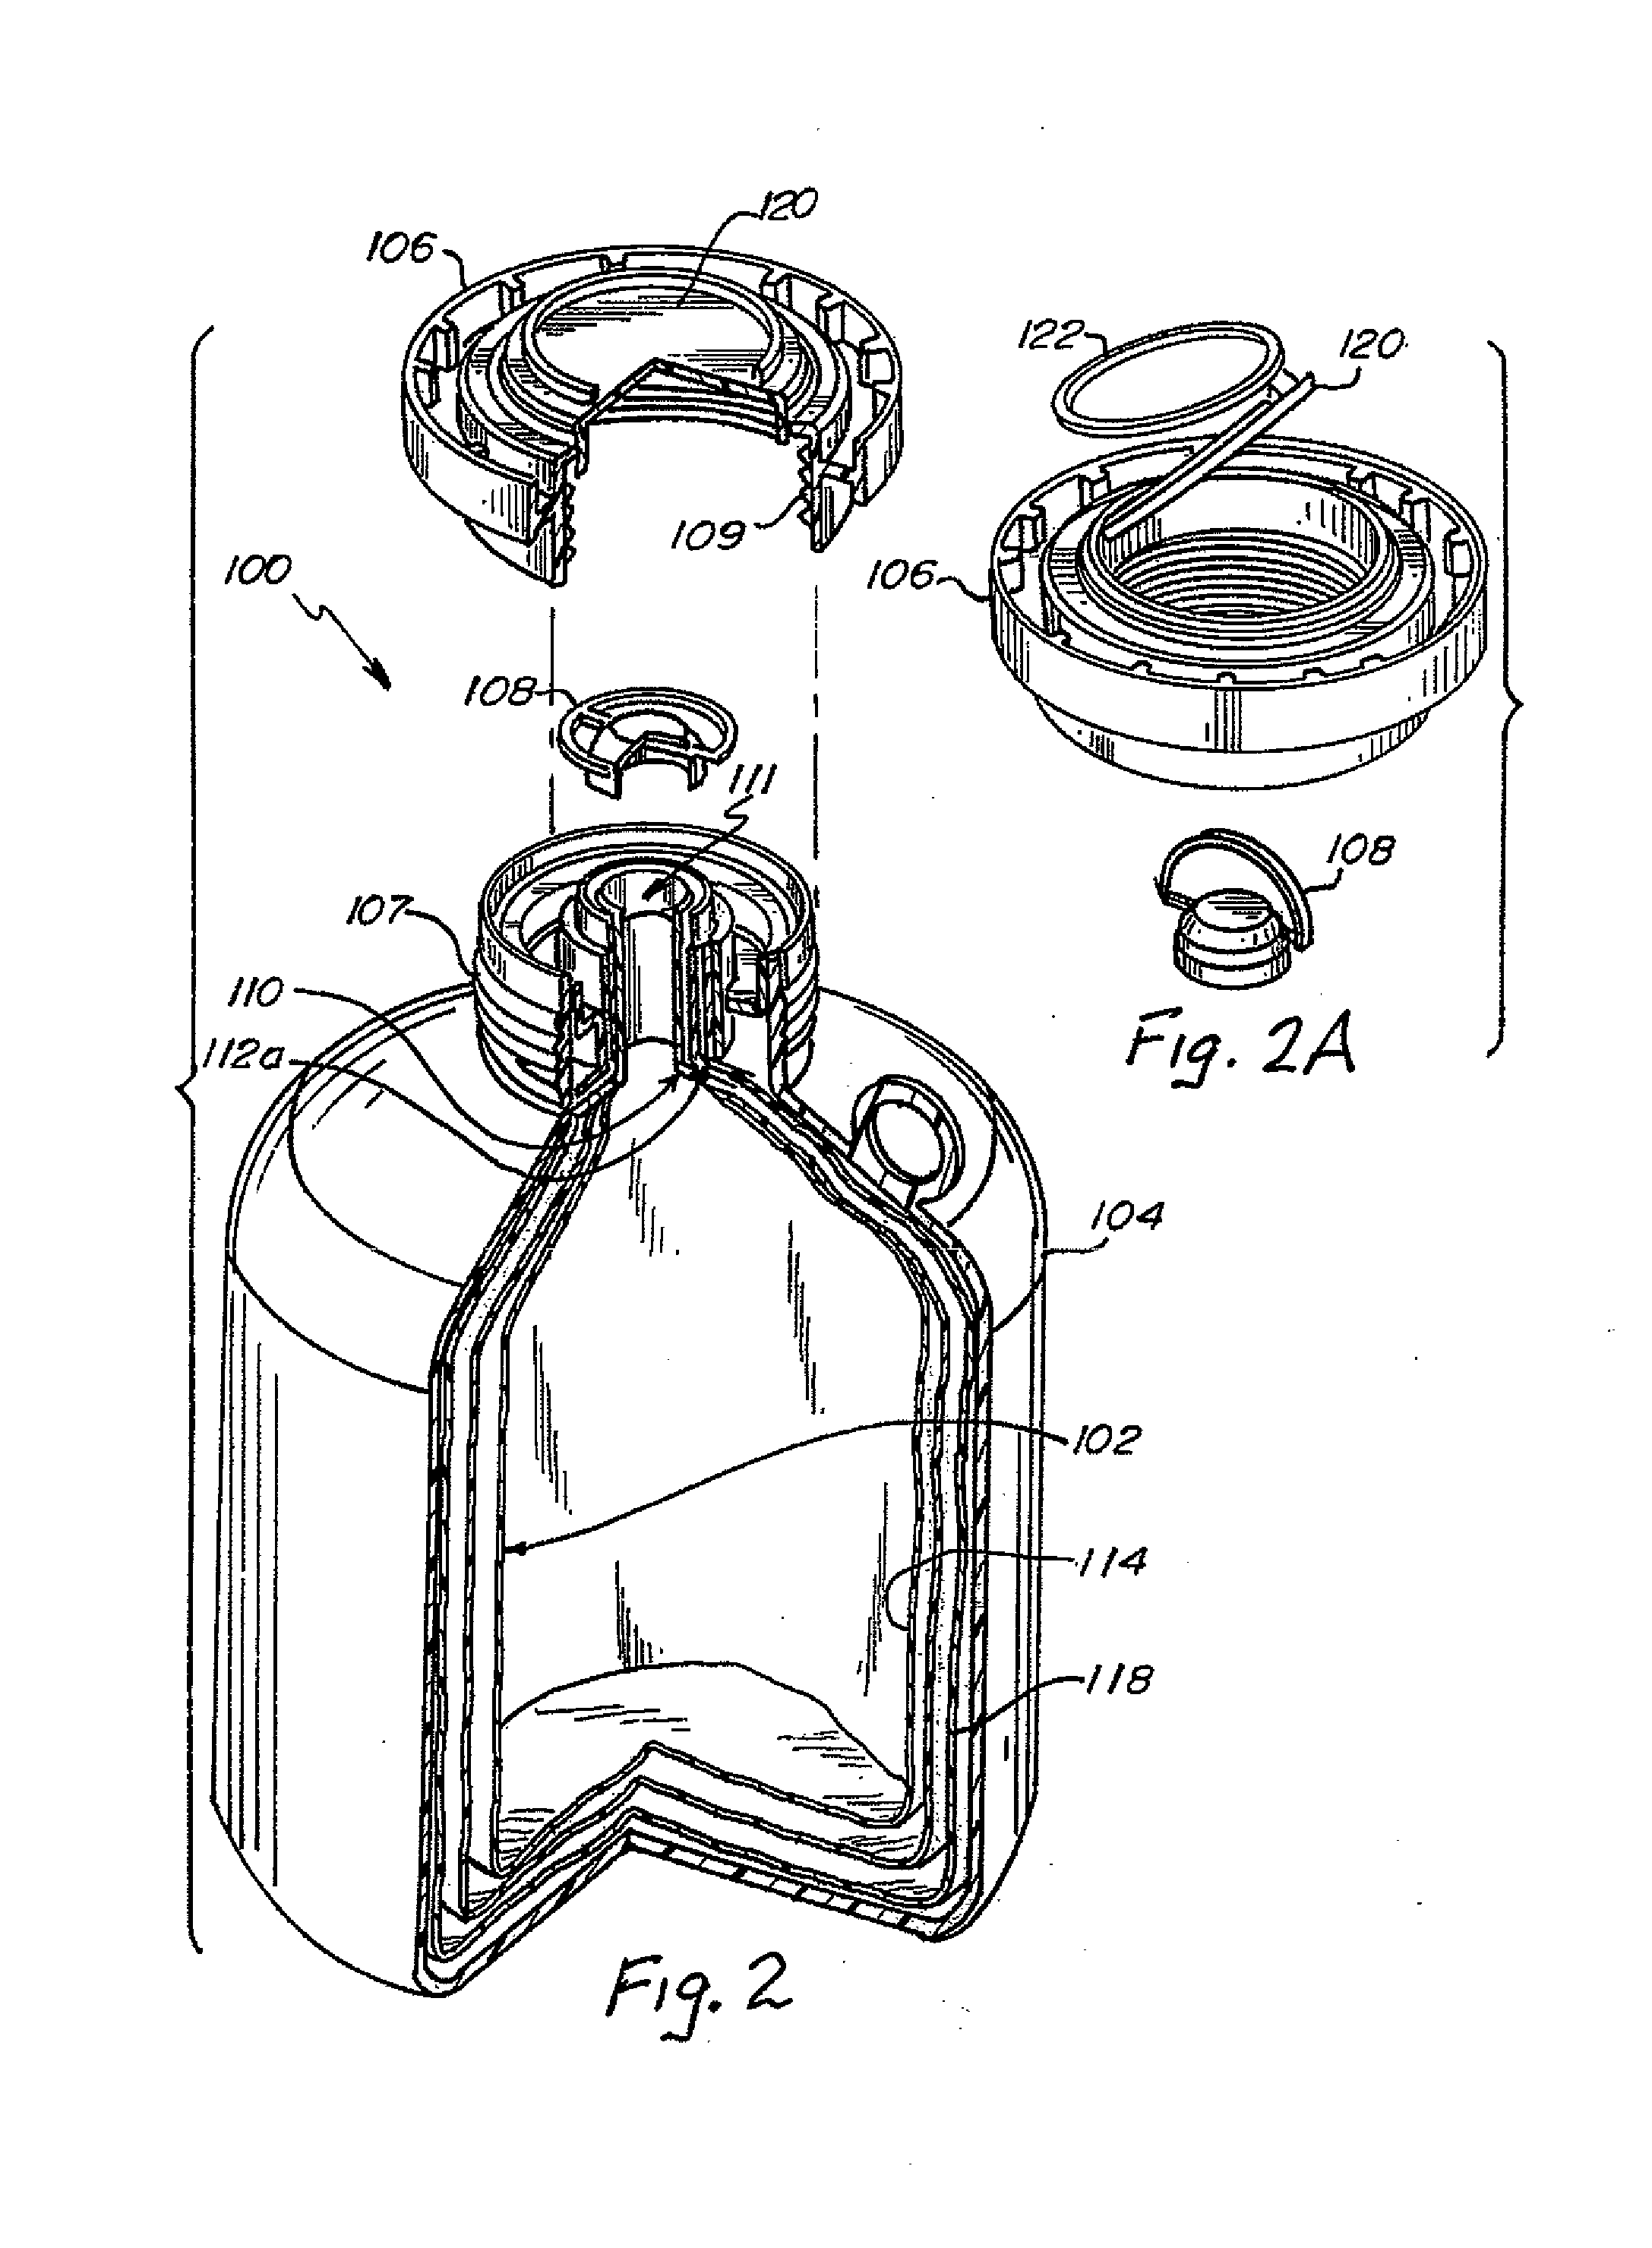 Method and apparatus for dispensing fluids